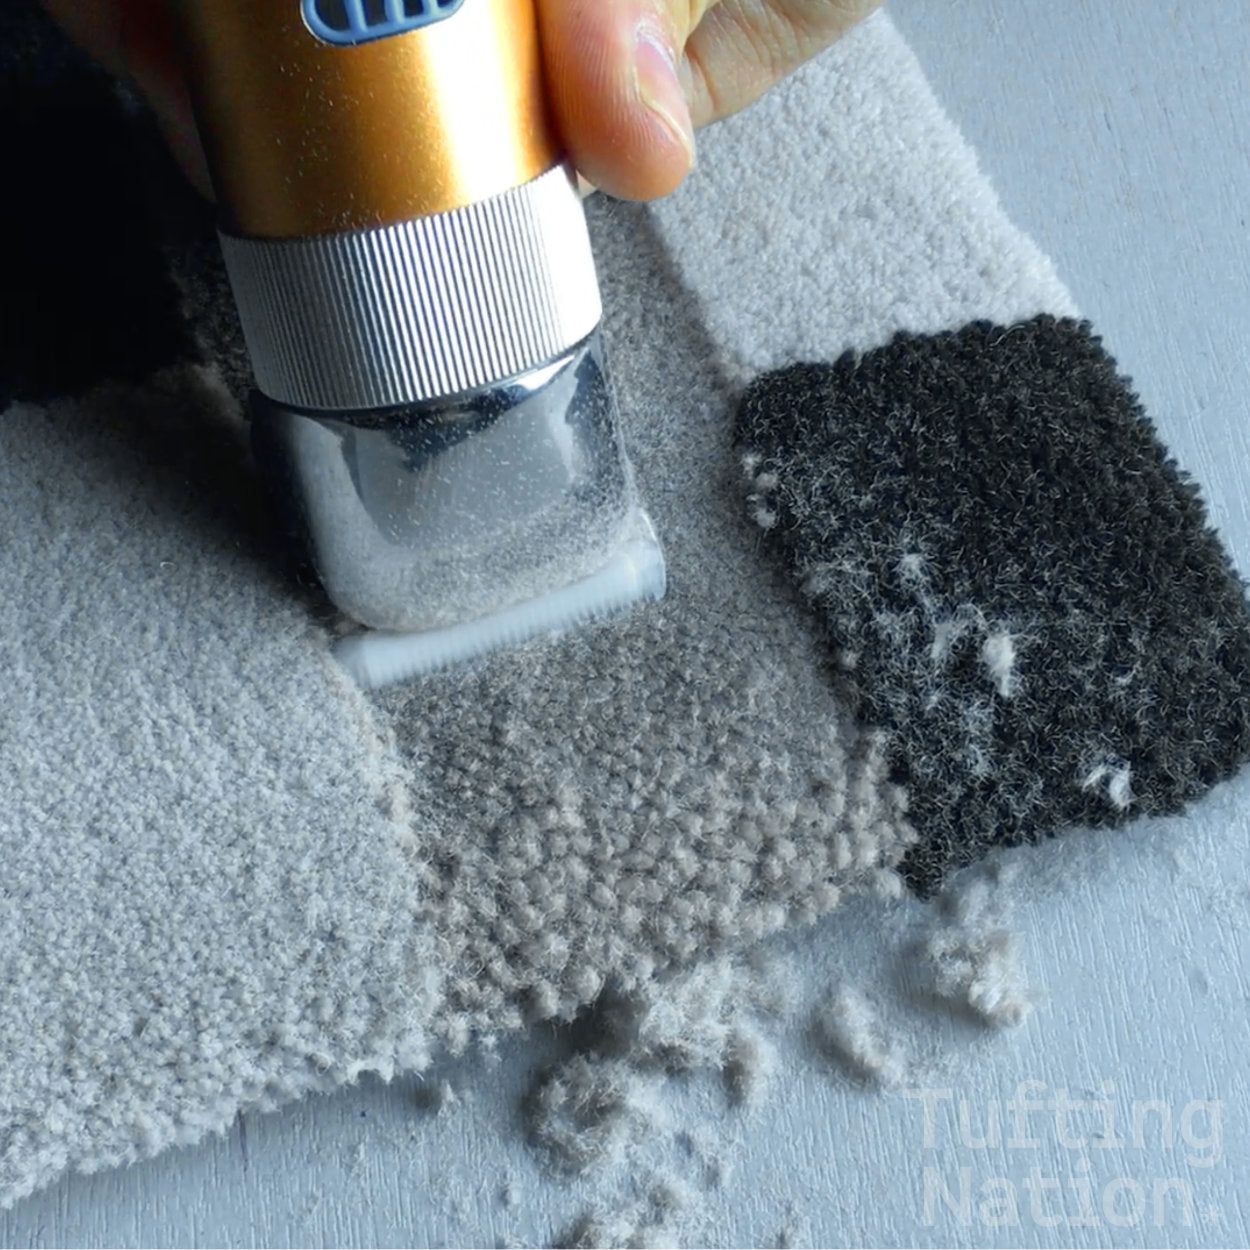 Carpet Clippers in action on a tufted rug | TuftingNation